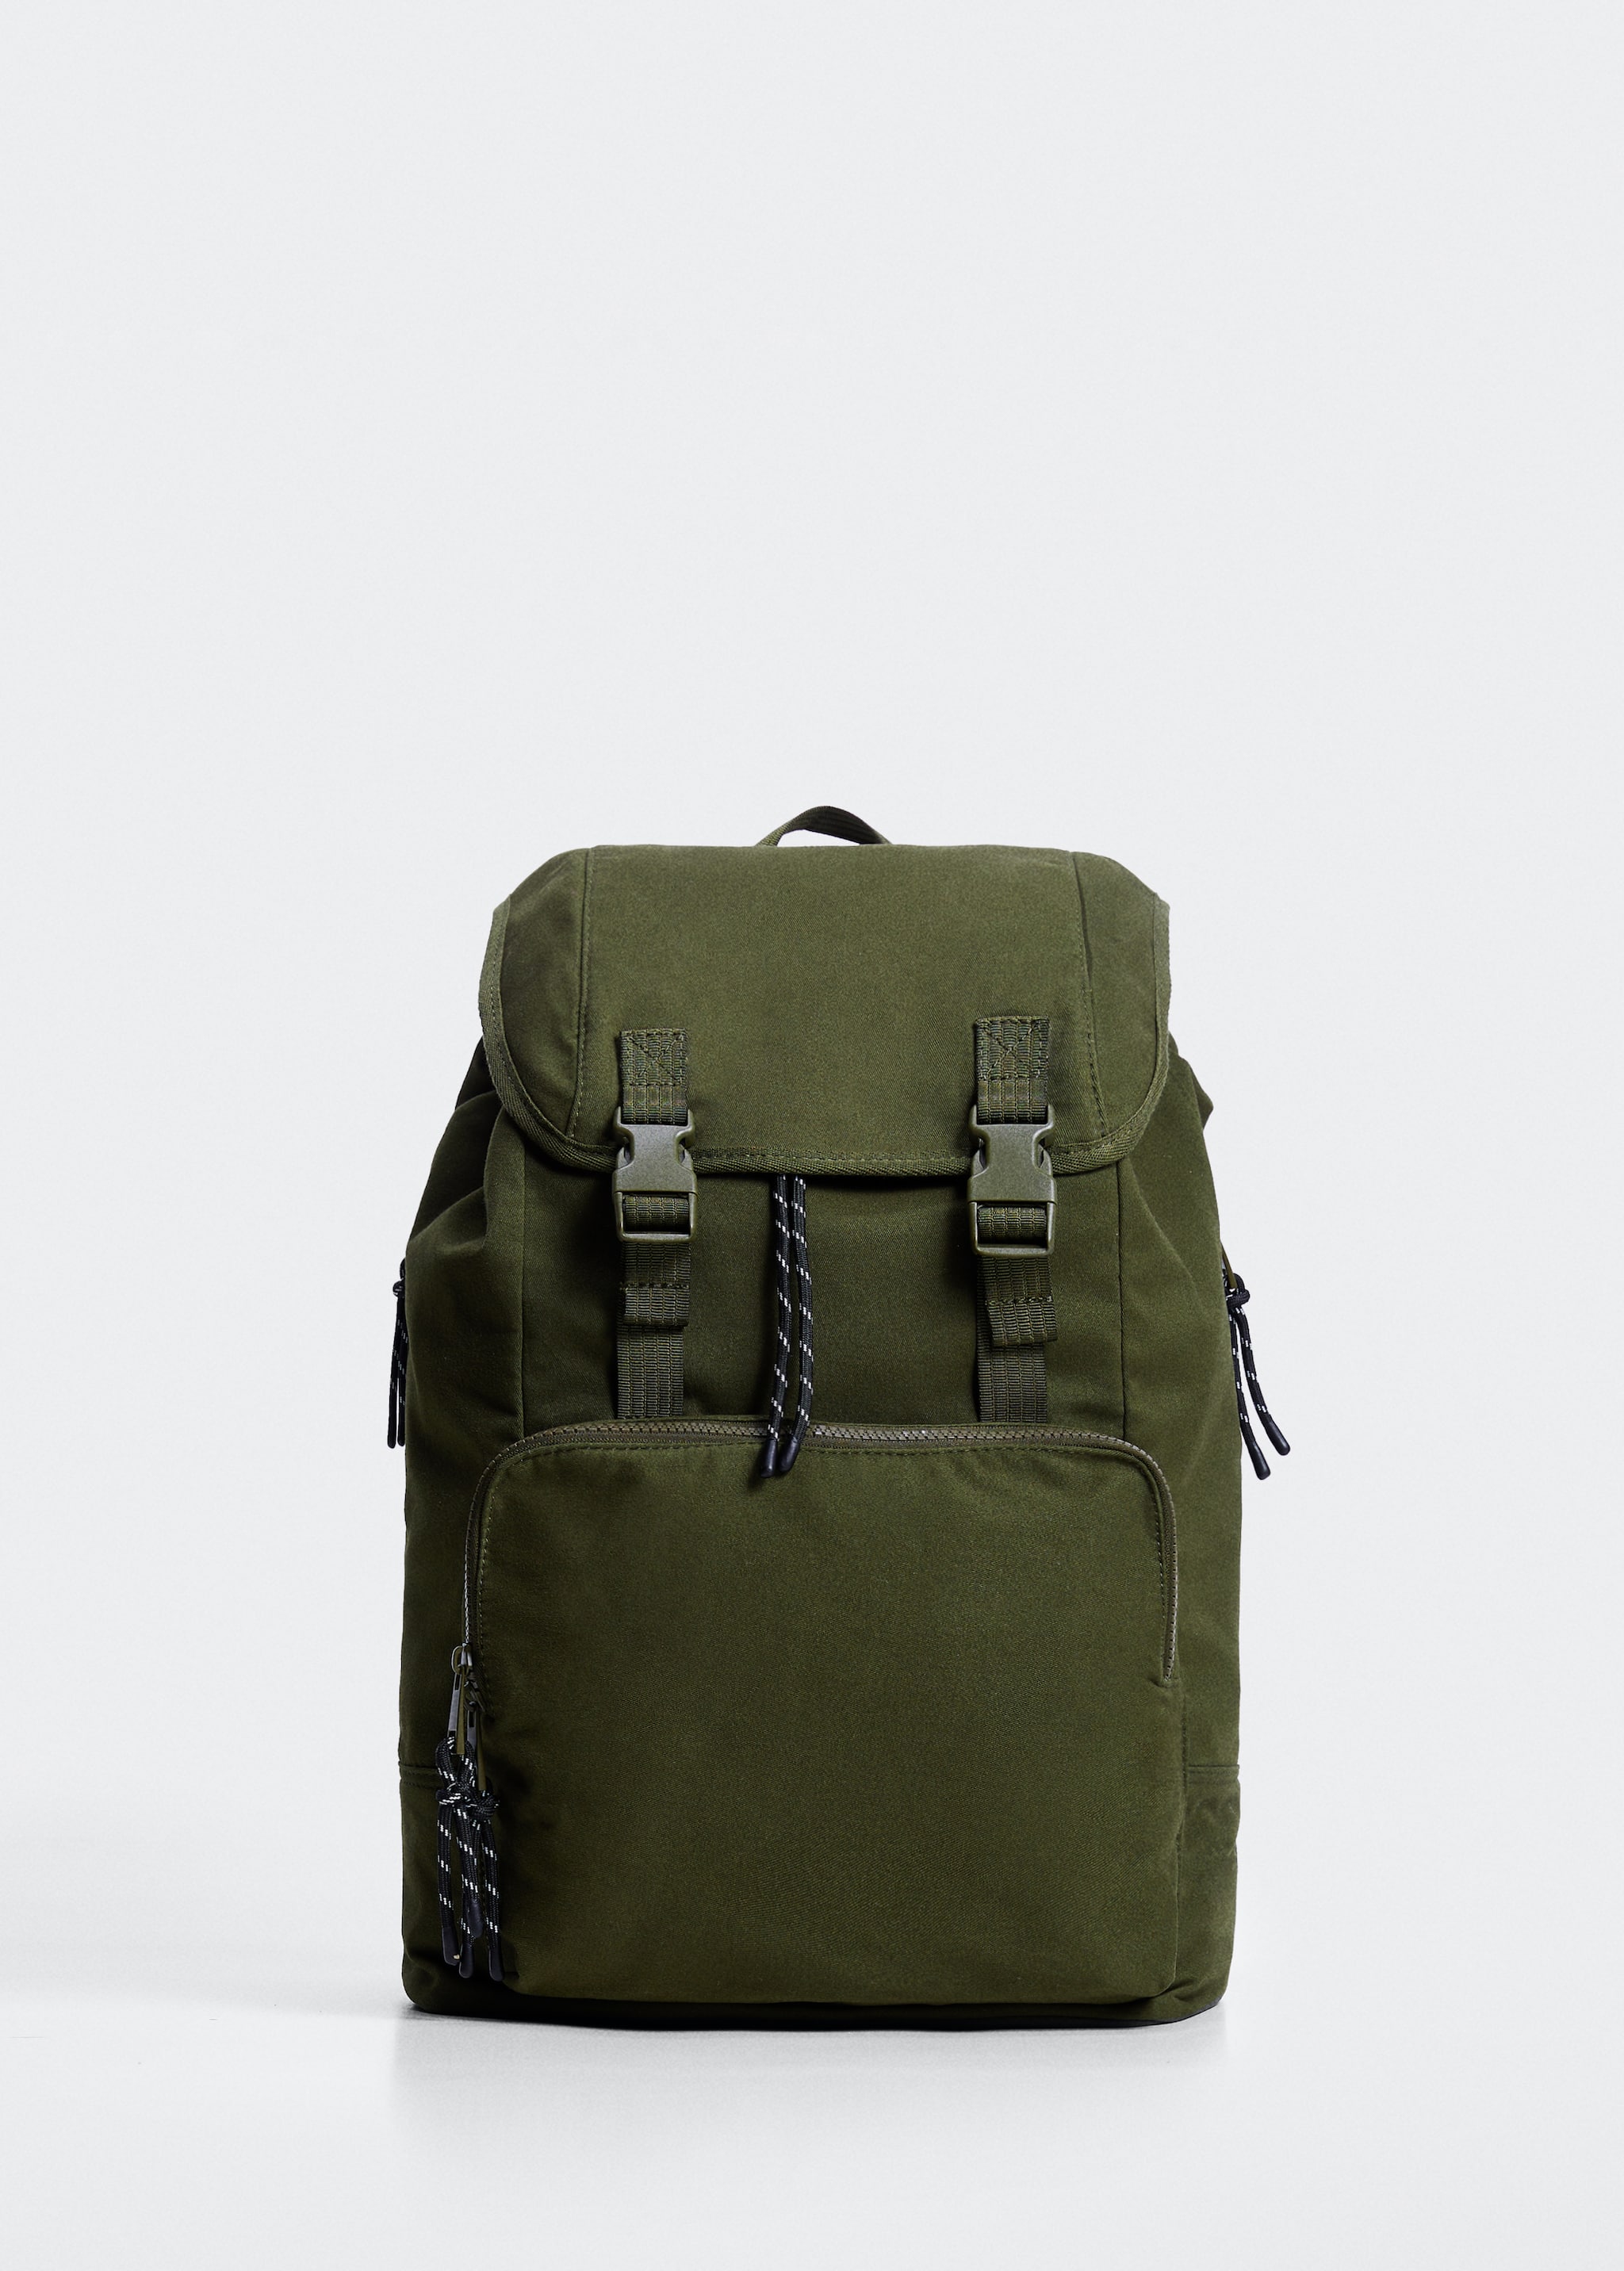 Waterproof backpack with flap - Article without model